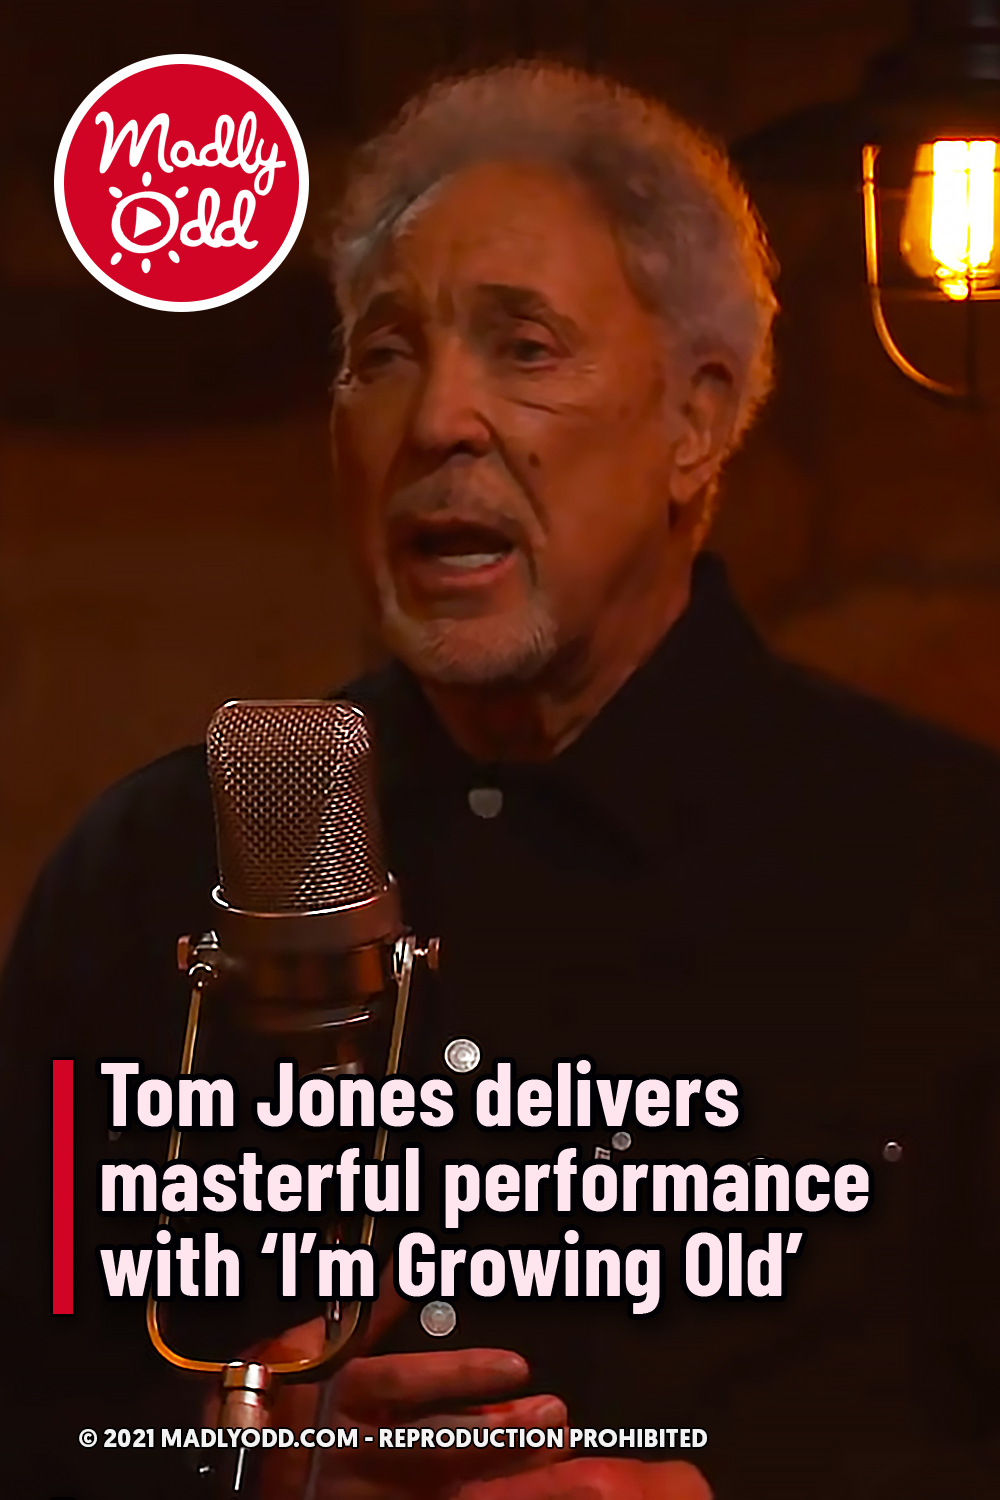 Tom Jones delivers masterful performance with ‘I’m Growing Old’